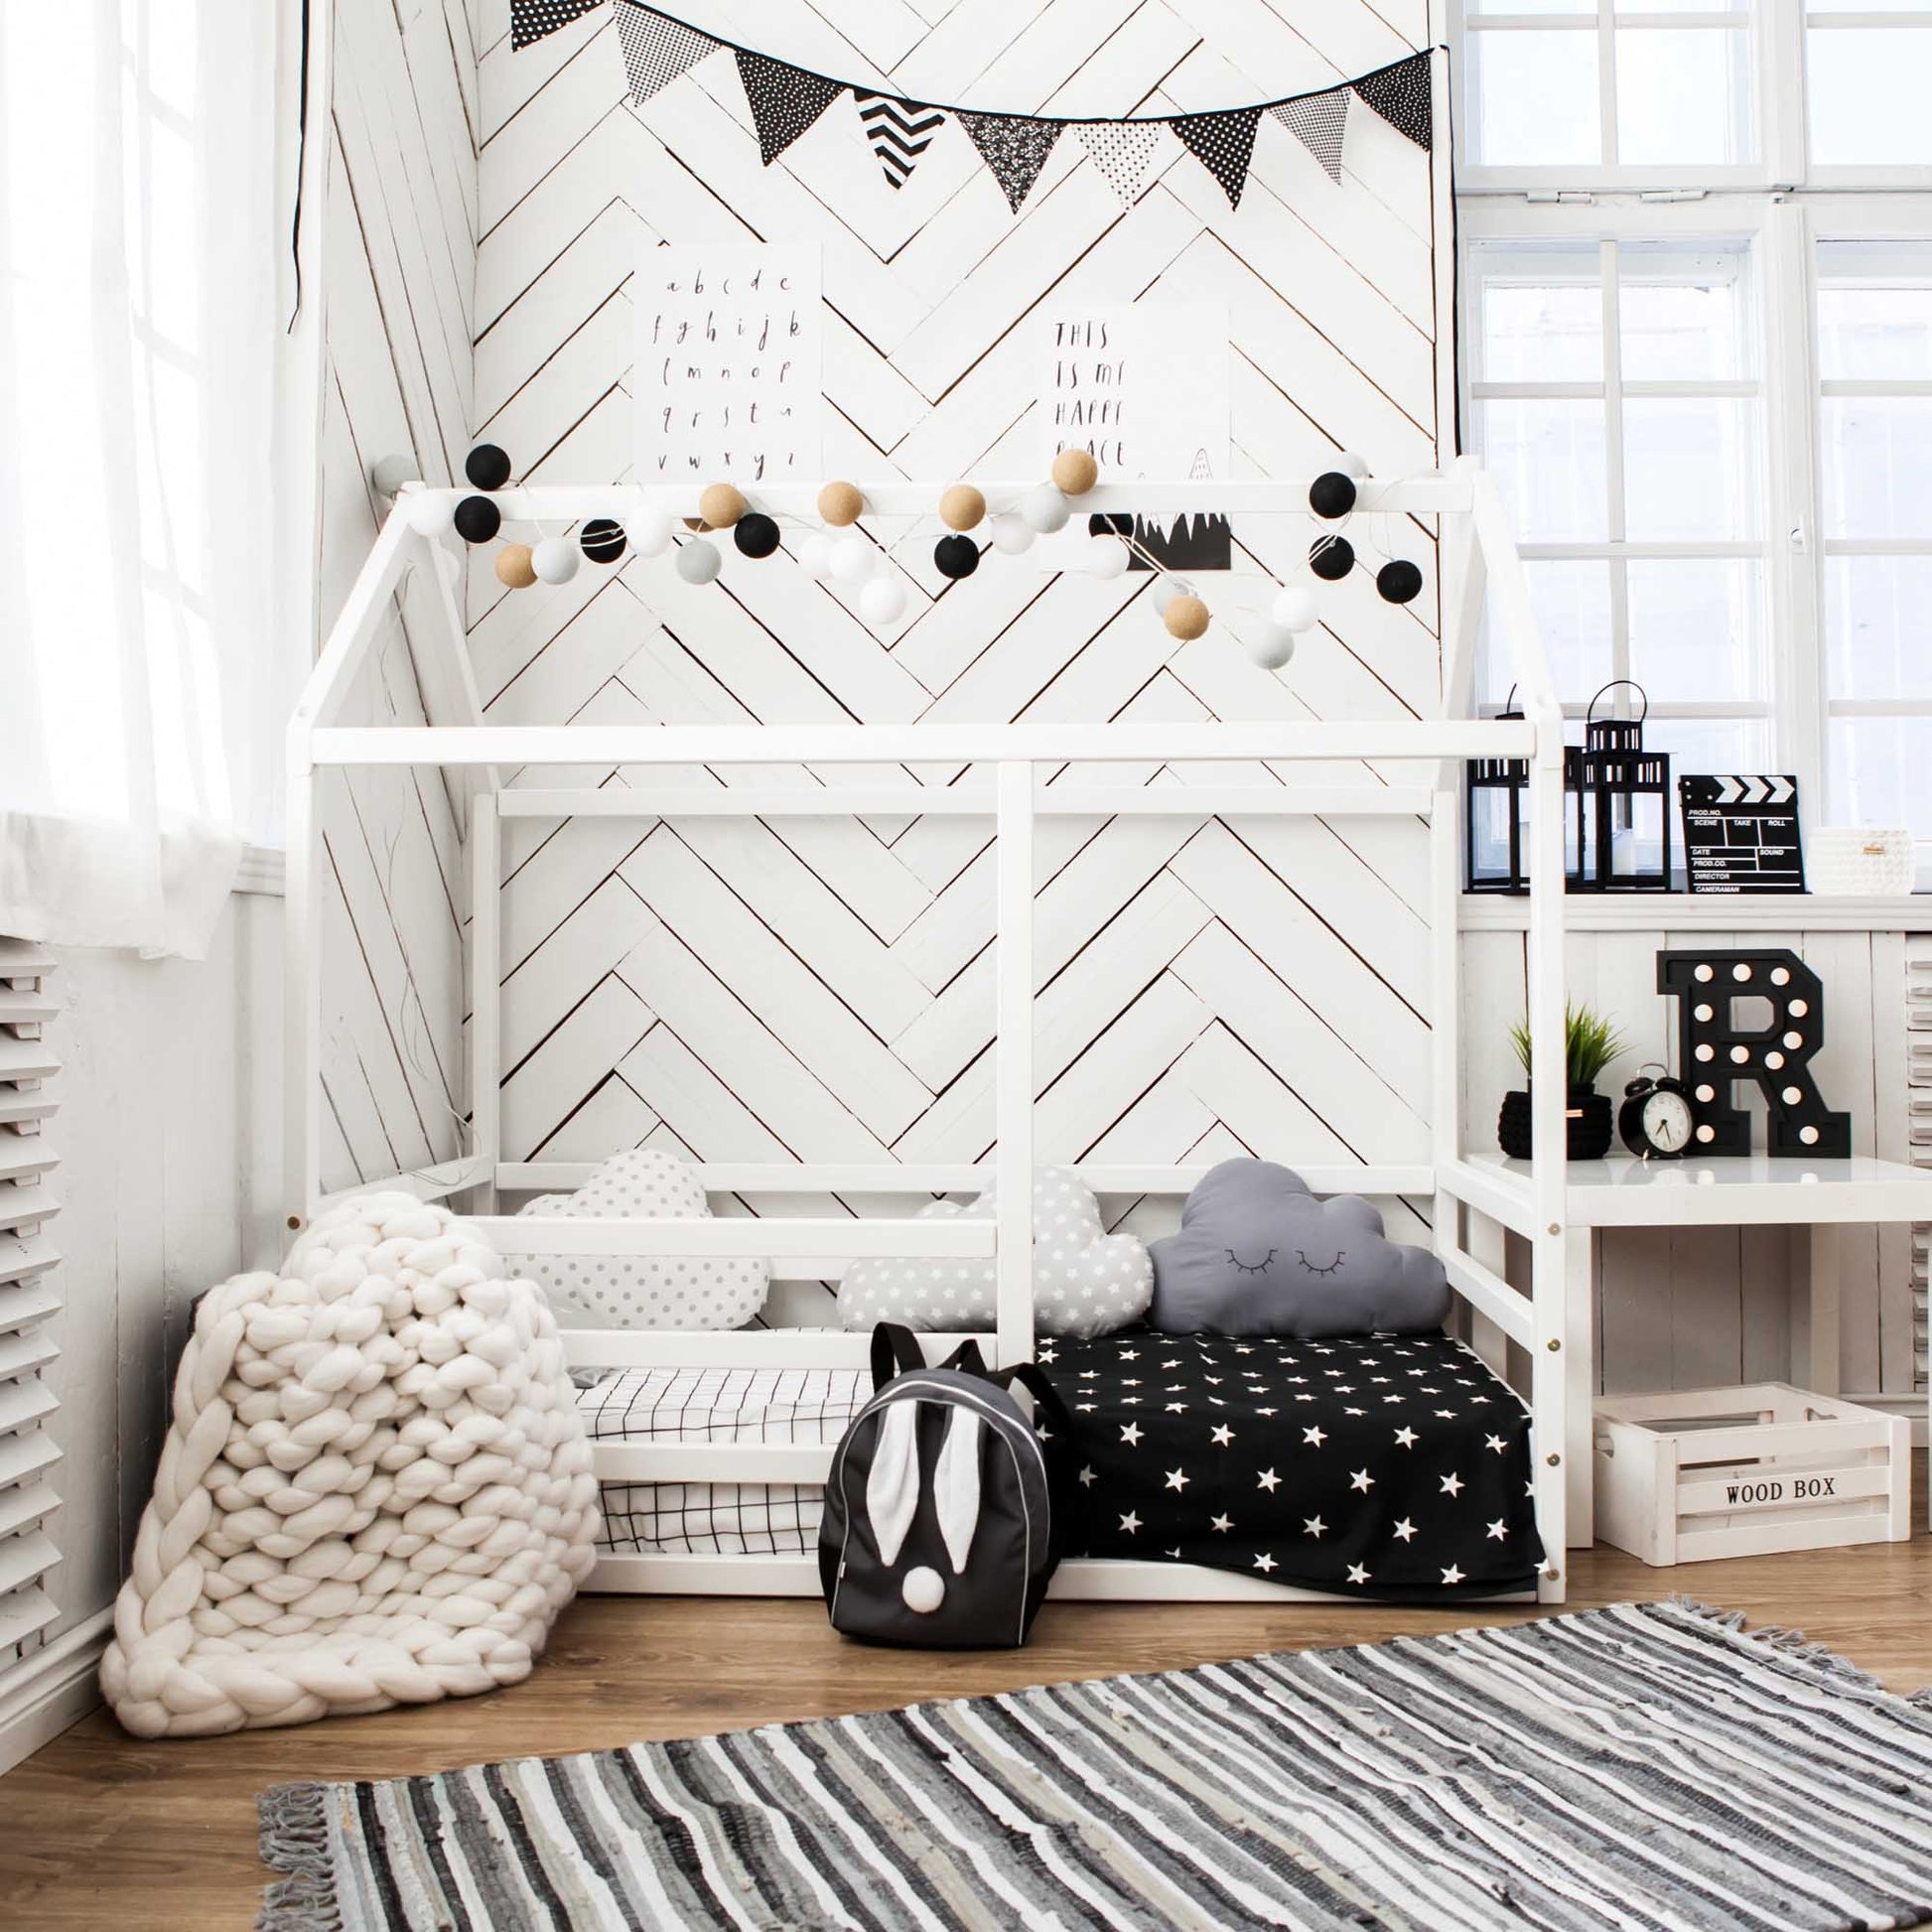 A floor level house bed with a horizontal fence in a white and black themed kids room, complete with a rug.